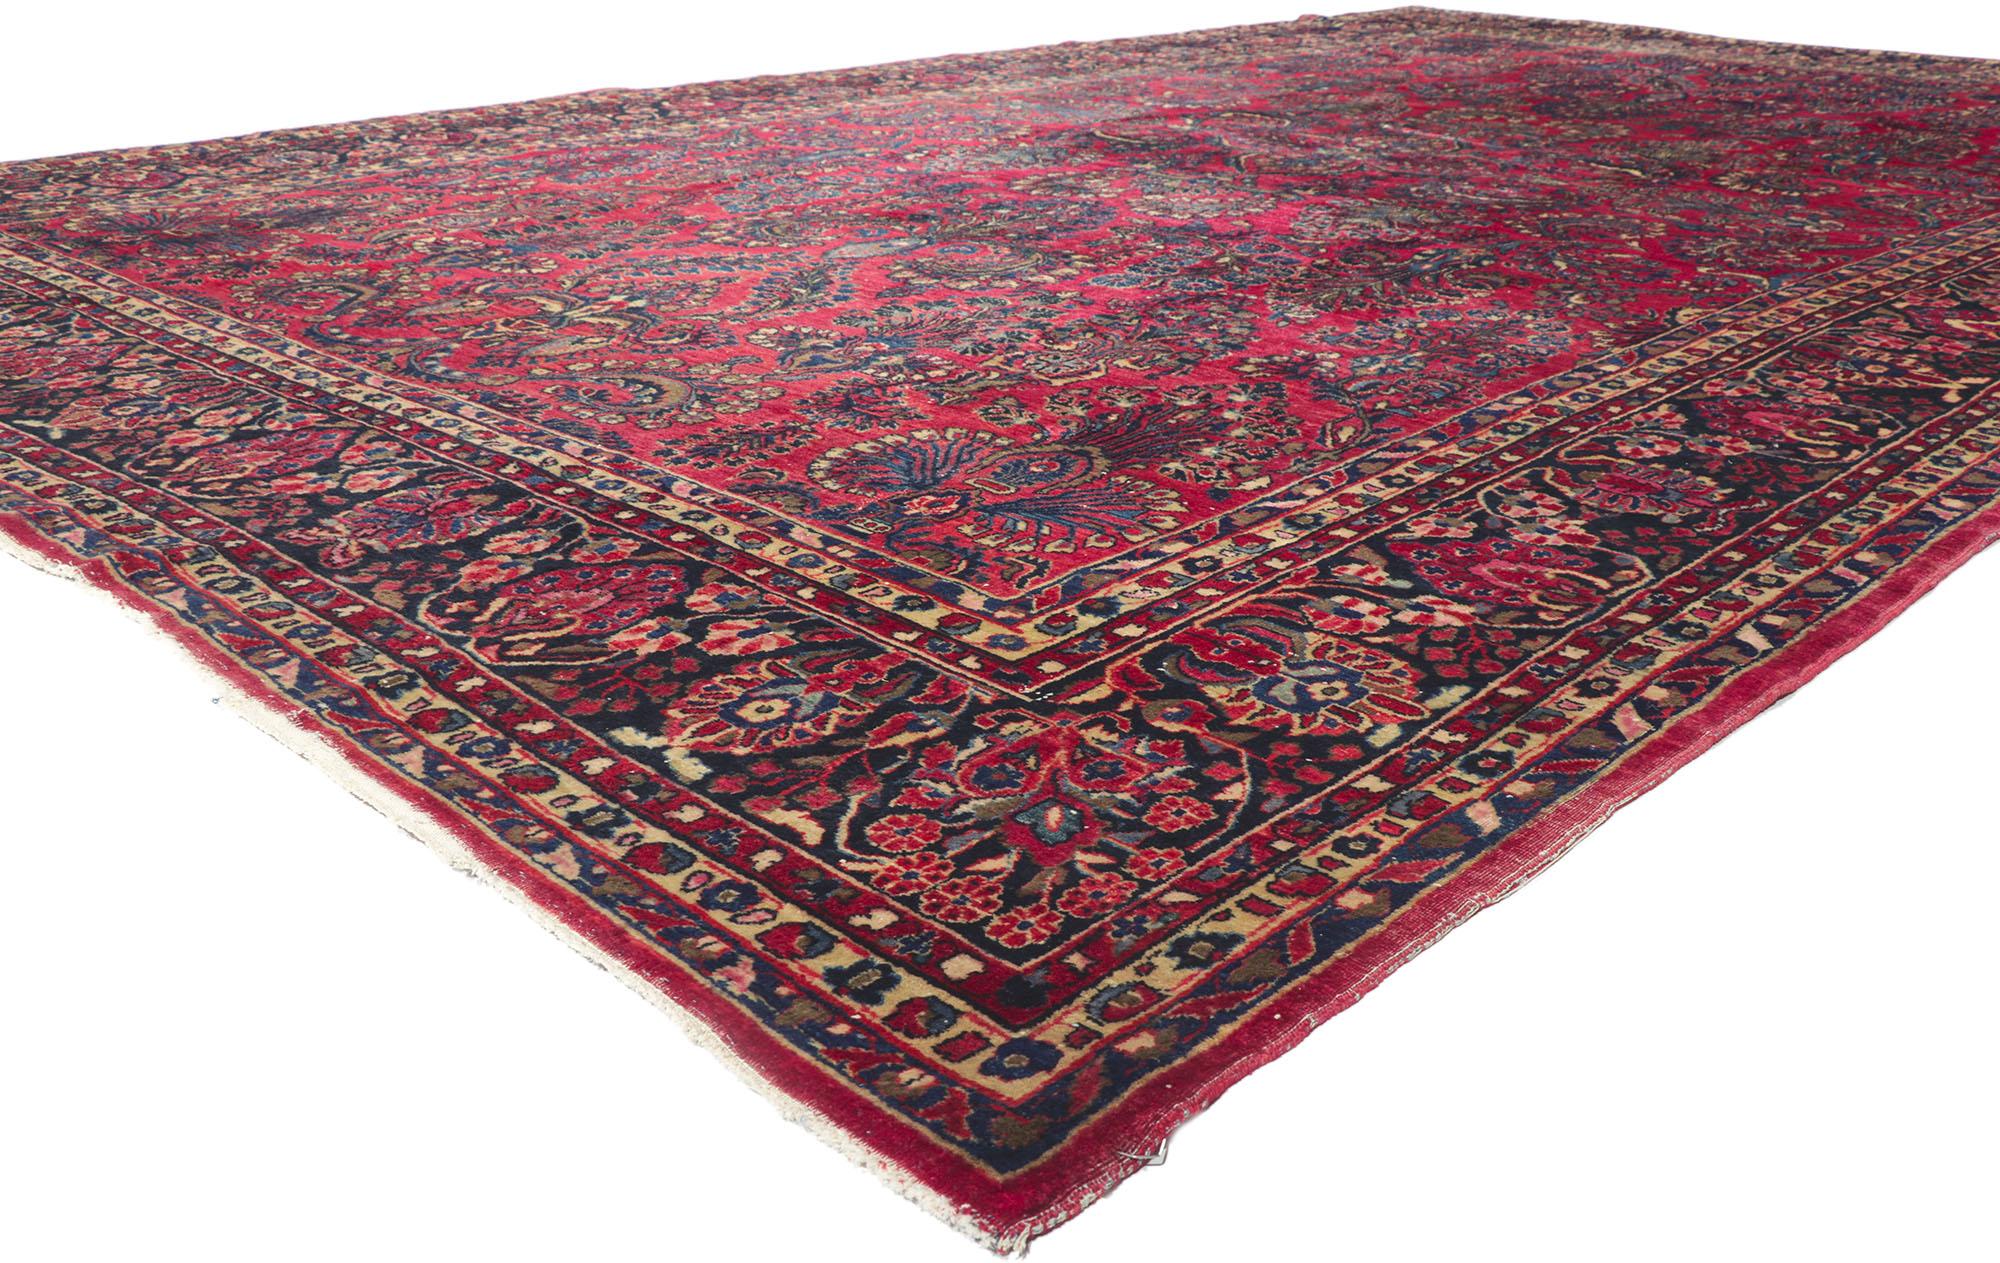 78223 antique Persian Sarouk room size rug 10'01 x 16'08.
Rendered in variegated shades of red, navy blue, brown, royal blue, cerulean, tan, pink, rose, and taupe with other accent colors. Desirable Age Wear. Abrash. Hand-knotted wool. Made in Iran.